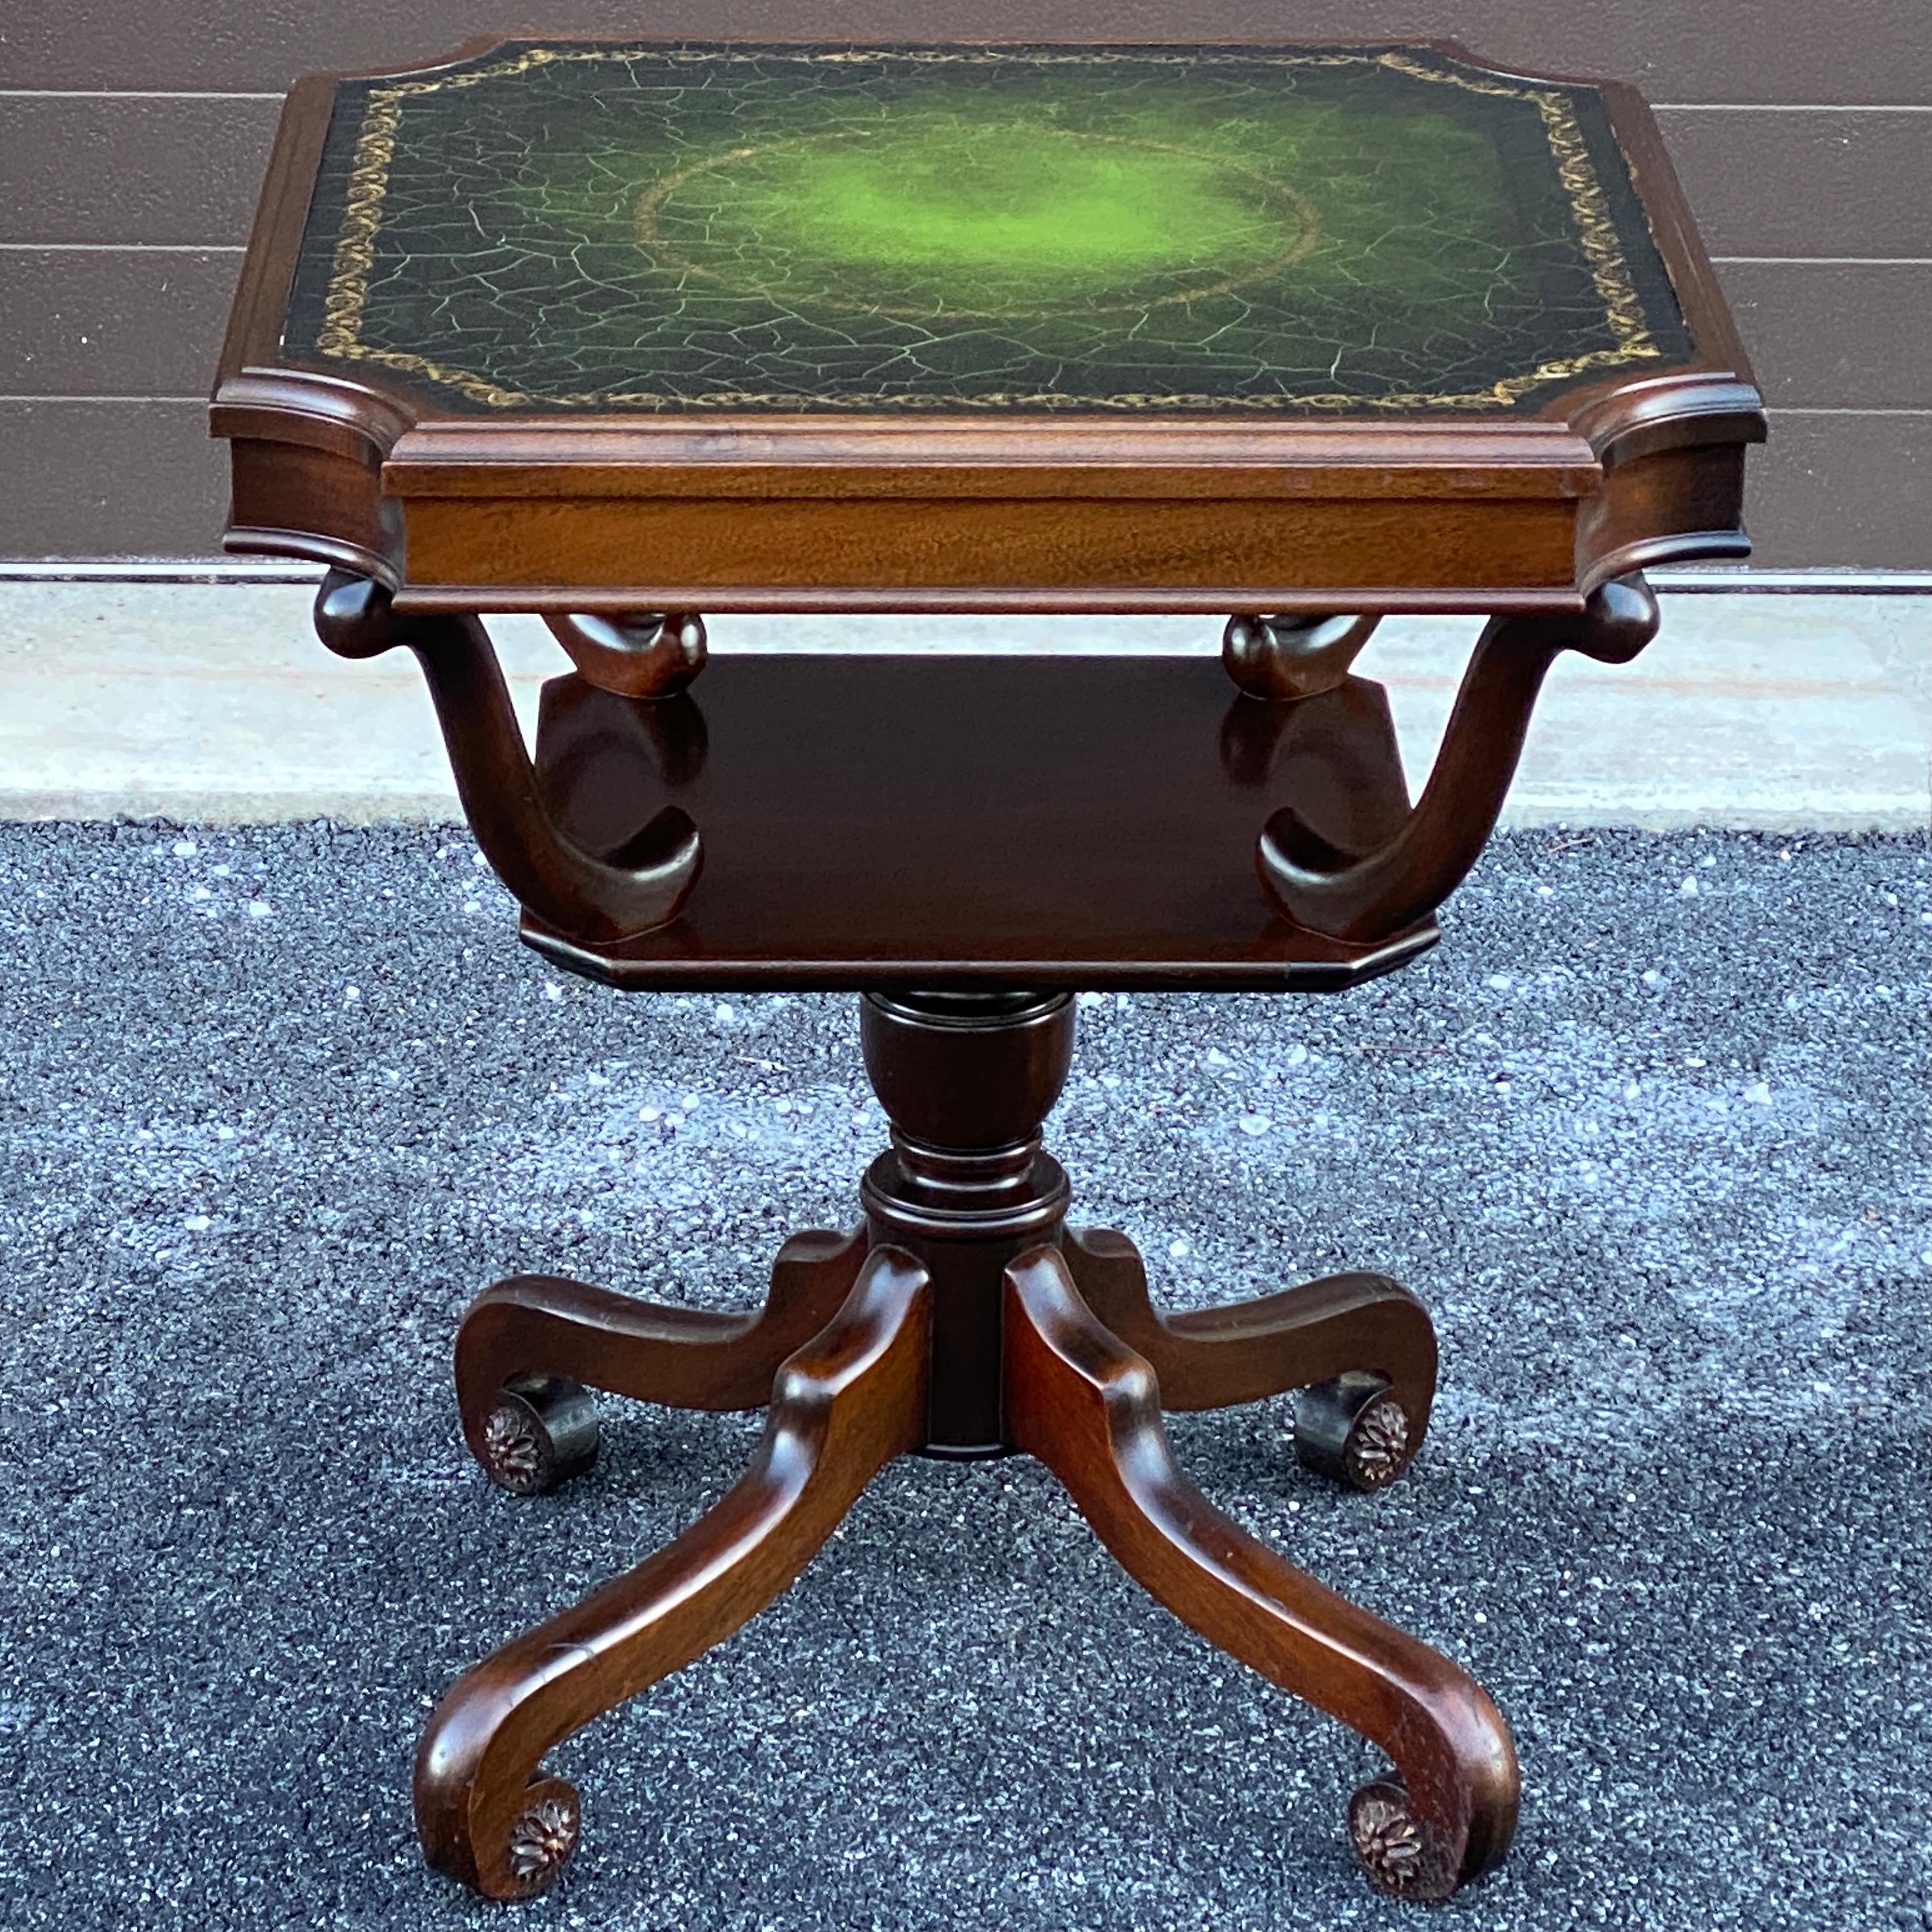 20th Century Regency Mahogany Scroll Foot Center Table With Tooled Green Leather Top For Sale